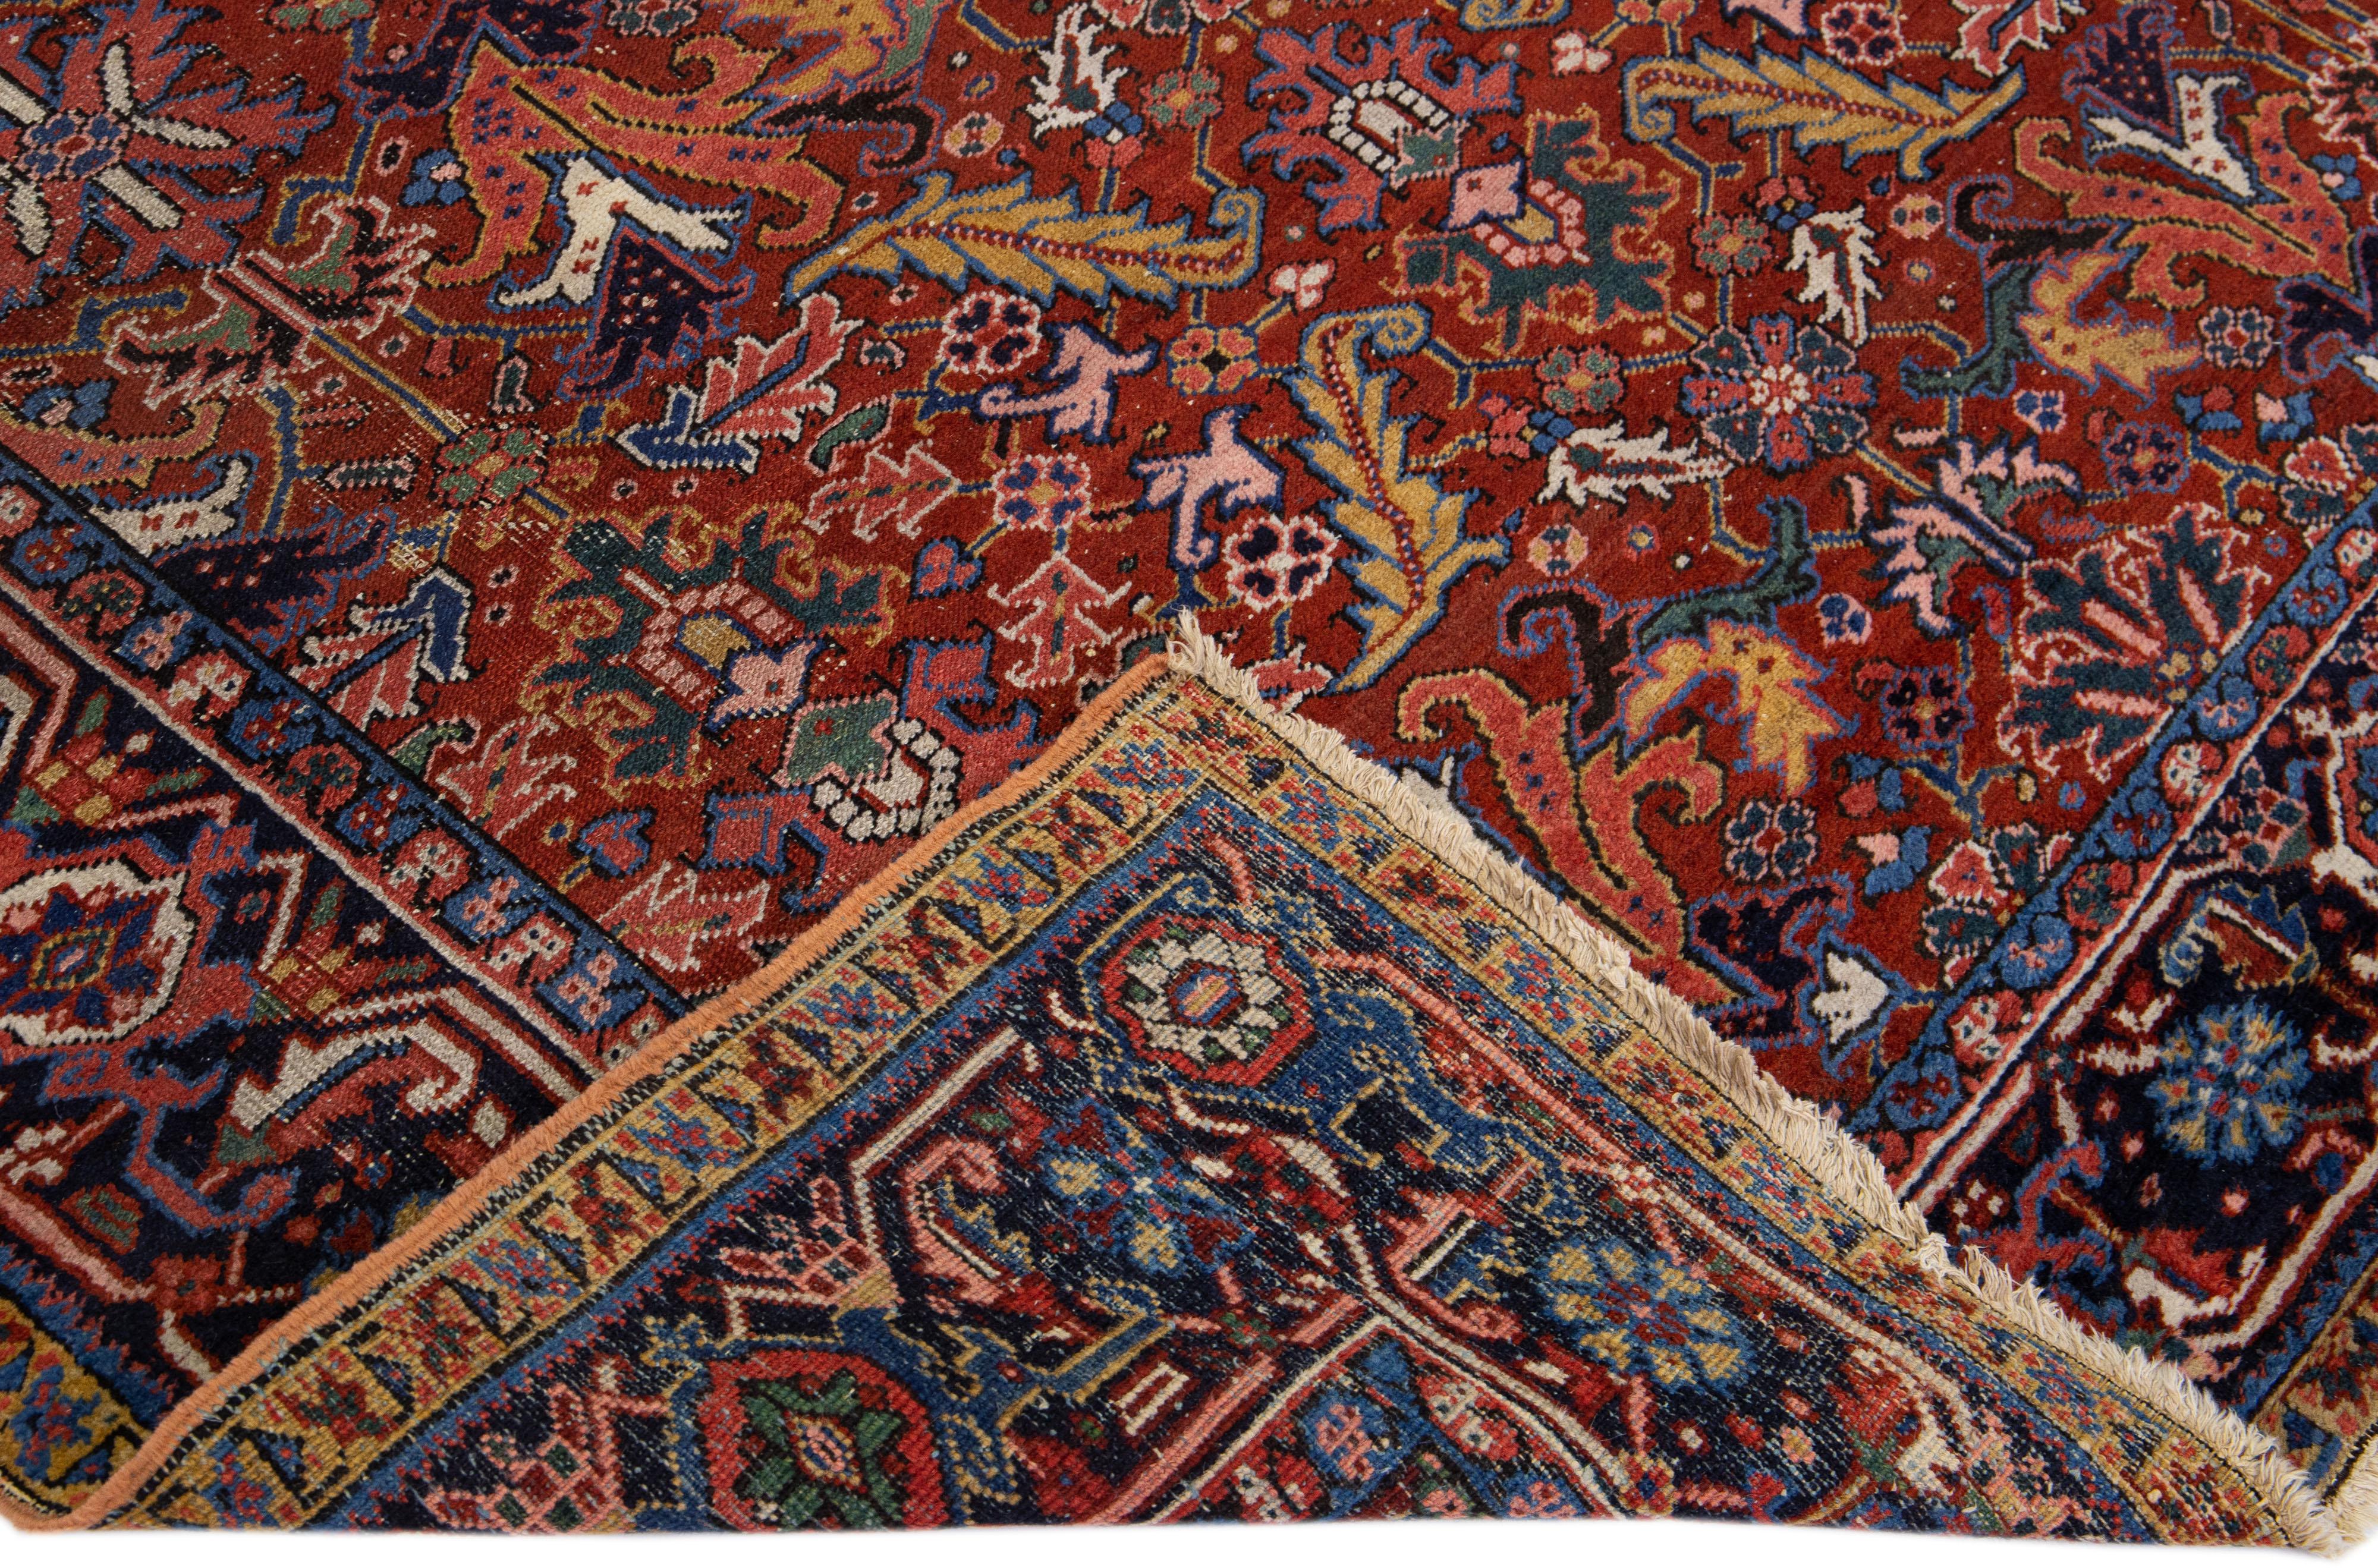 Beautiful antique Heriz hand-knotted wool rug with a red field. This Heriz rug has a navy blue frame and multi-color accents in a gorgeous all-over floral pattern design.

This rug measures: 7'3